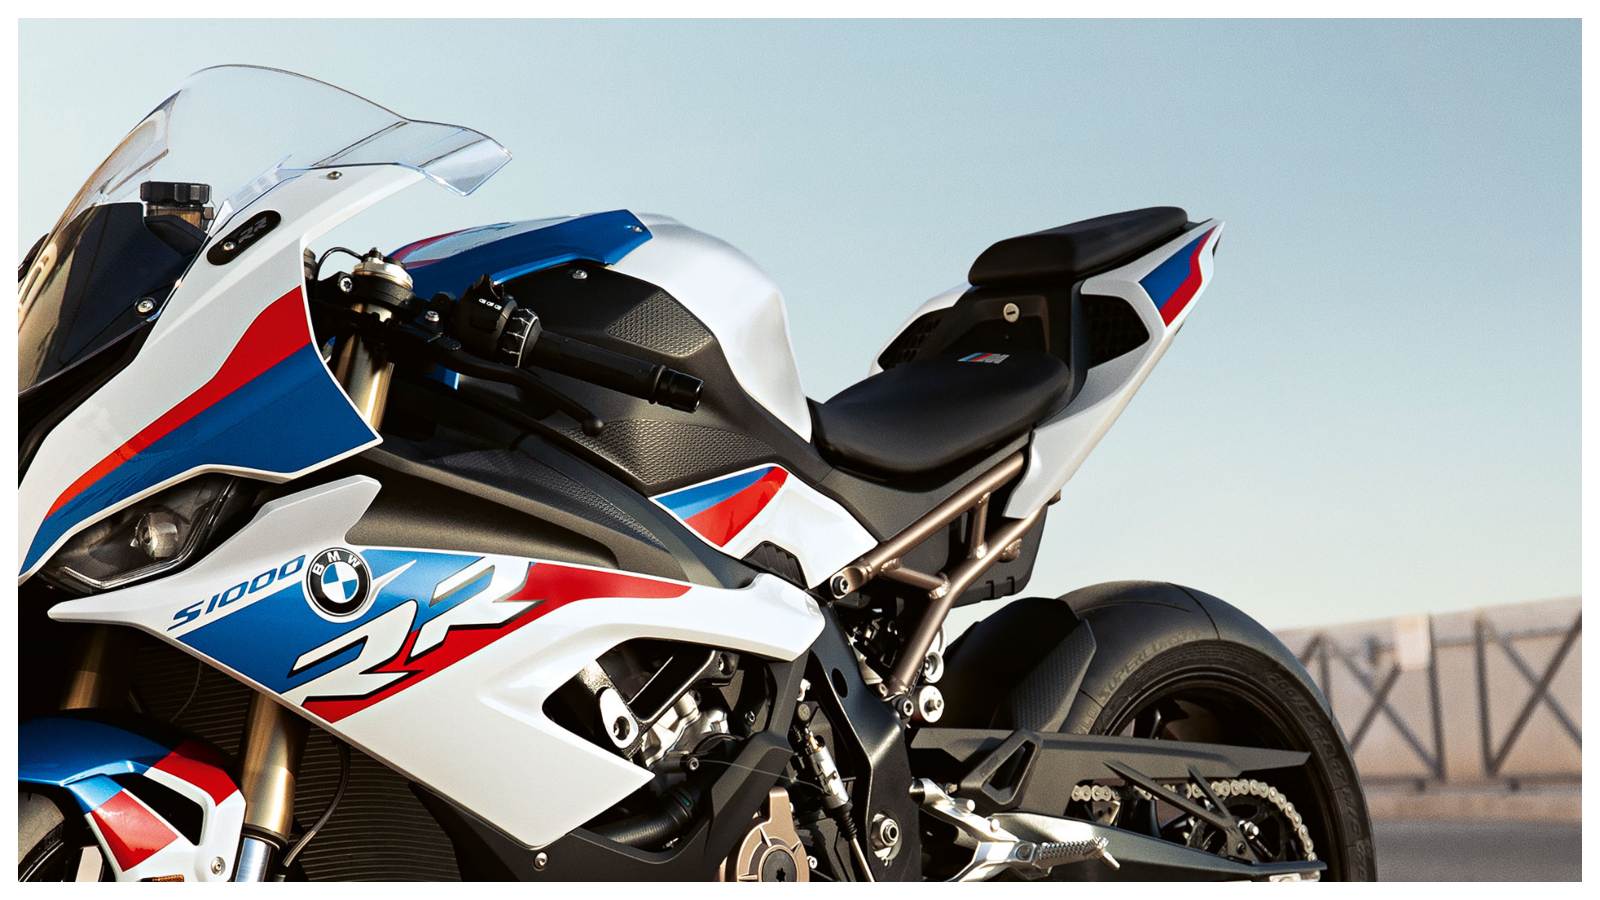 BMW S1000 RR Launched In India! Prices Start From INR 18.50 Lakhs